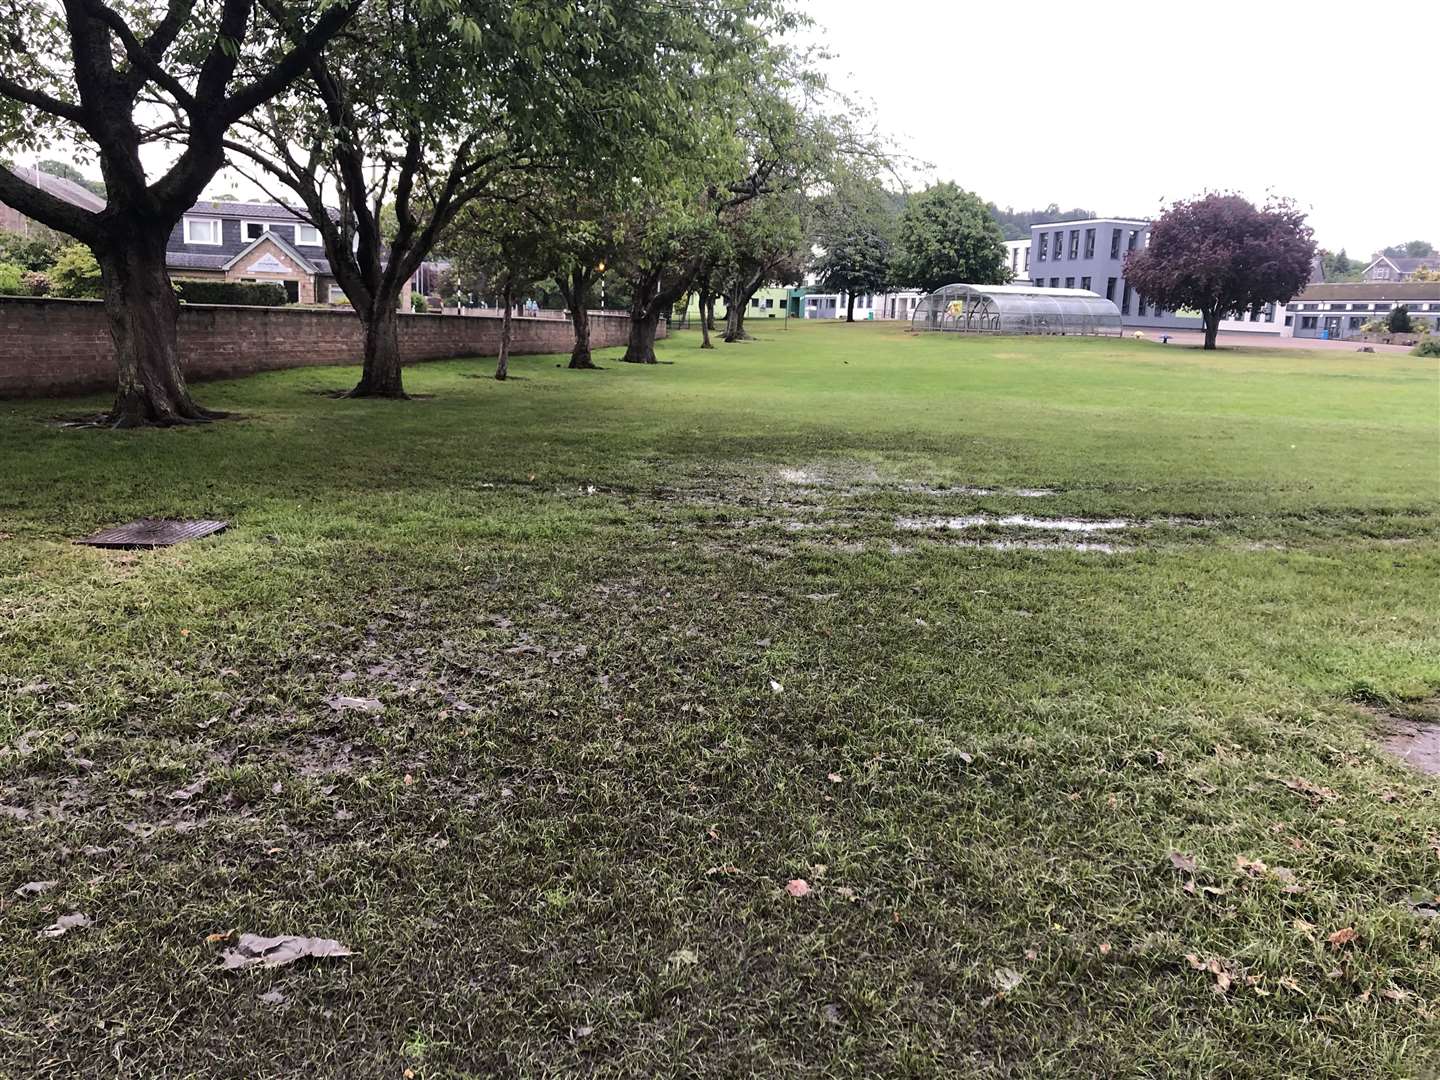 Applegrove Primary School’s playground was partly flooded with sewage after a storm last month.